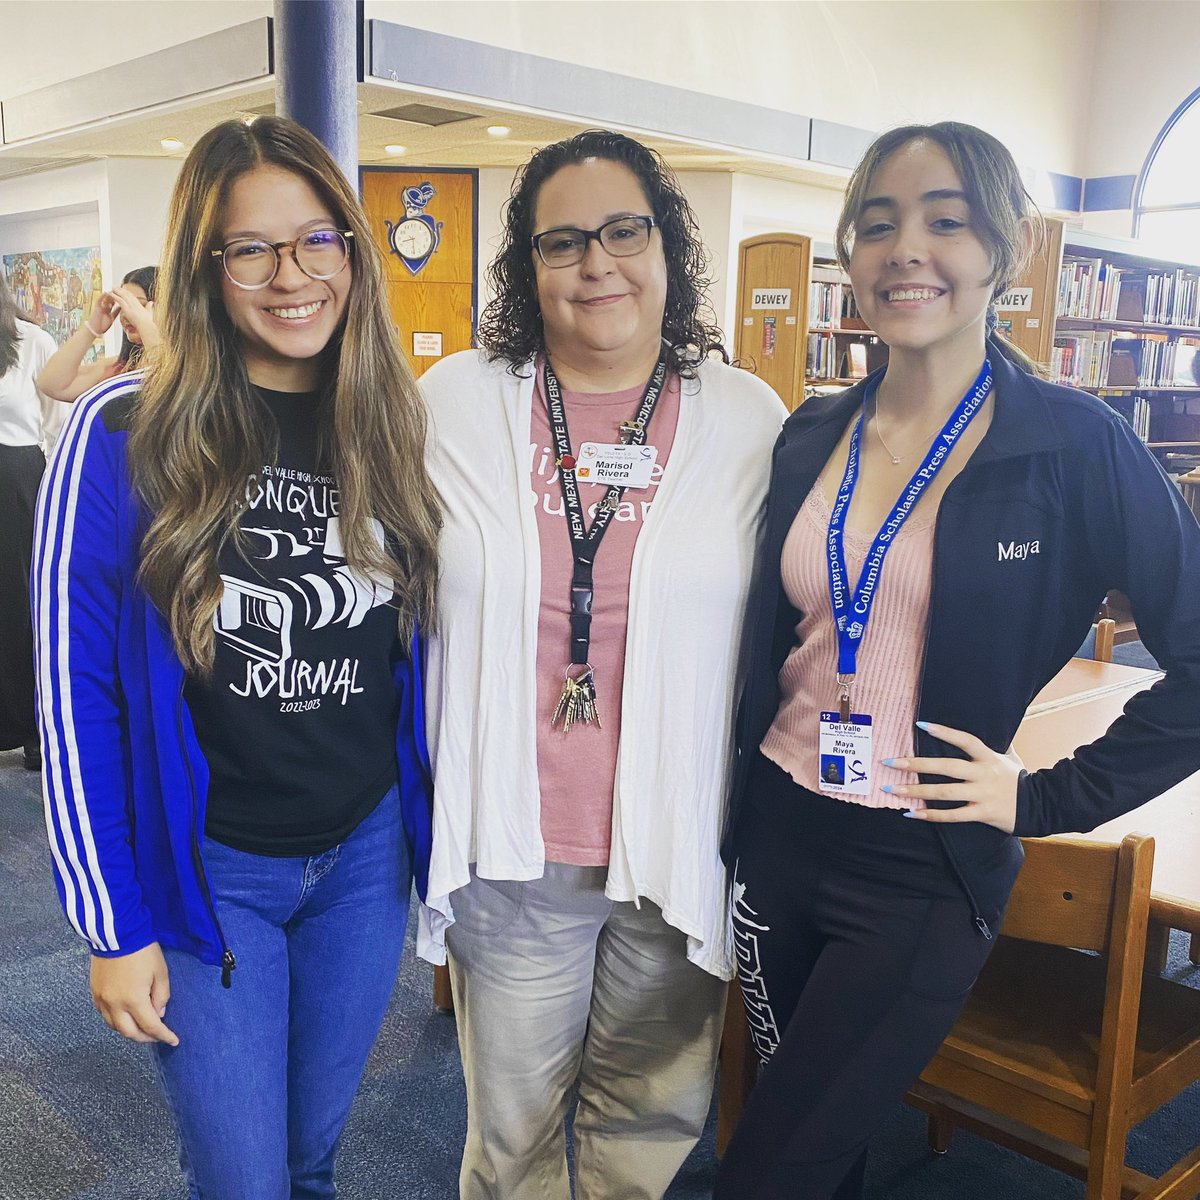 This year’s Conquest Journal Chief Directors, Jessie Santana & Maya Rivera, joined me at our first DV Leadership meeting of the year. Looking forward to this year and all the great things these ladies will accomplish. #OFOD @DVHSYISD